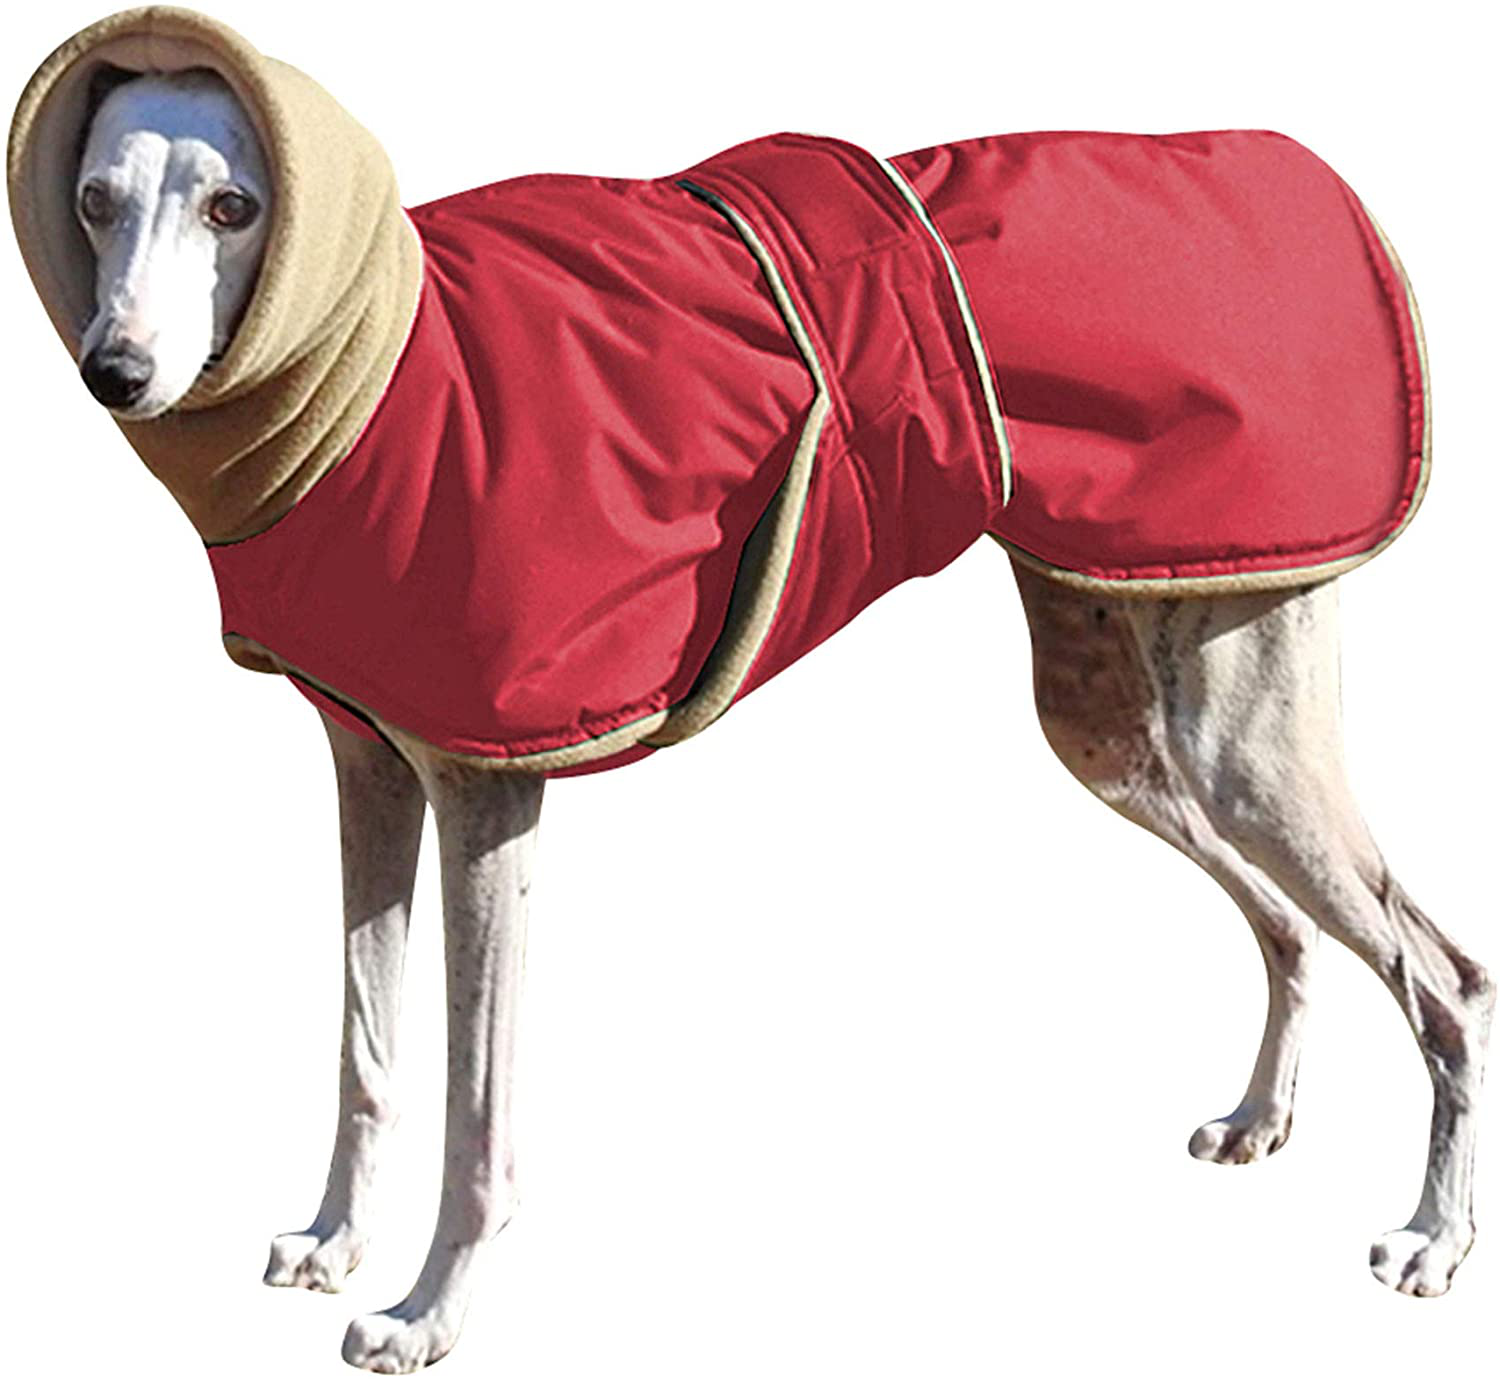 Didog Waterproof Dog Winter Jacket with Turtleneck Scarf,Pets Cold Weather Coats with Soft Warm Fleece Lining,Windproof Snowsuit Outdoor Apparel for Medium Large Dogs Animals & Pet Supplies > Pet Supplies > Dog Supplies > Dog Apparel Didog Red Chest:23.5-31.5" Back Length:23.5" 